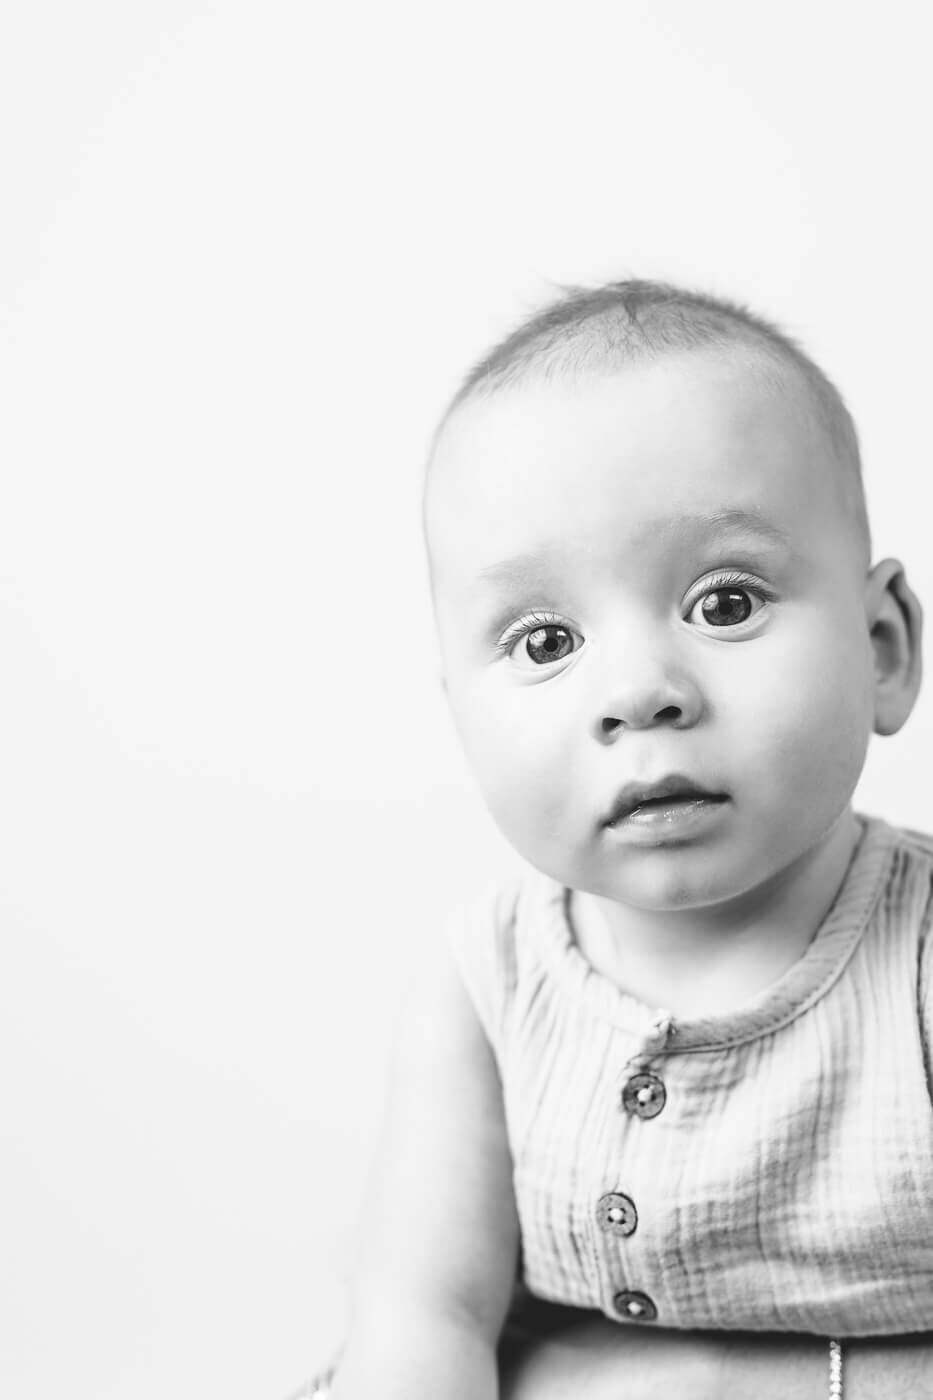 Infant staring at Tampa photographer intently